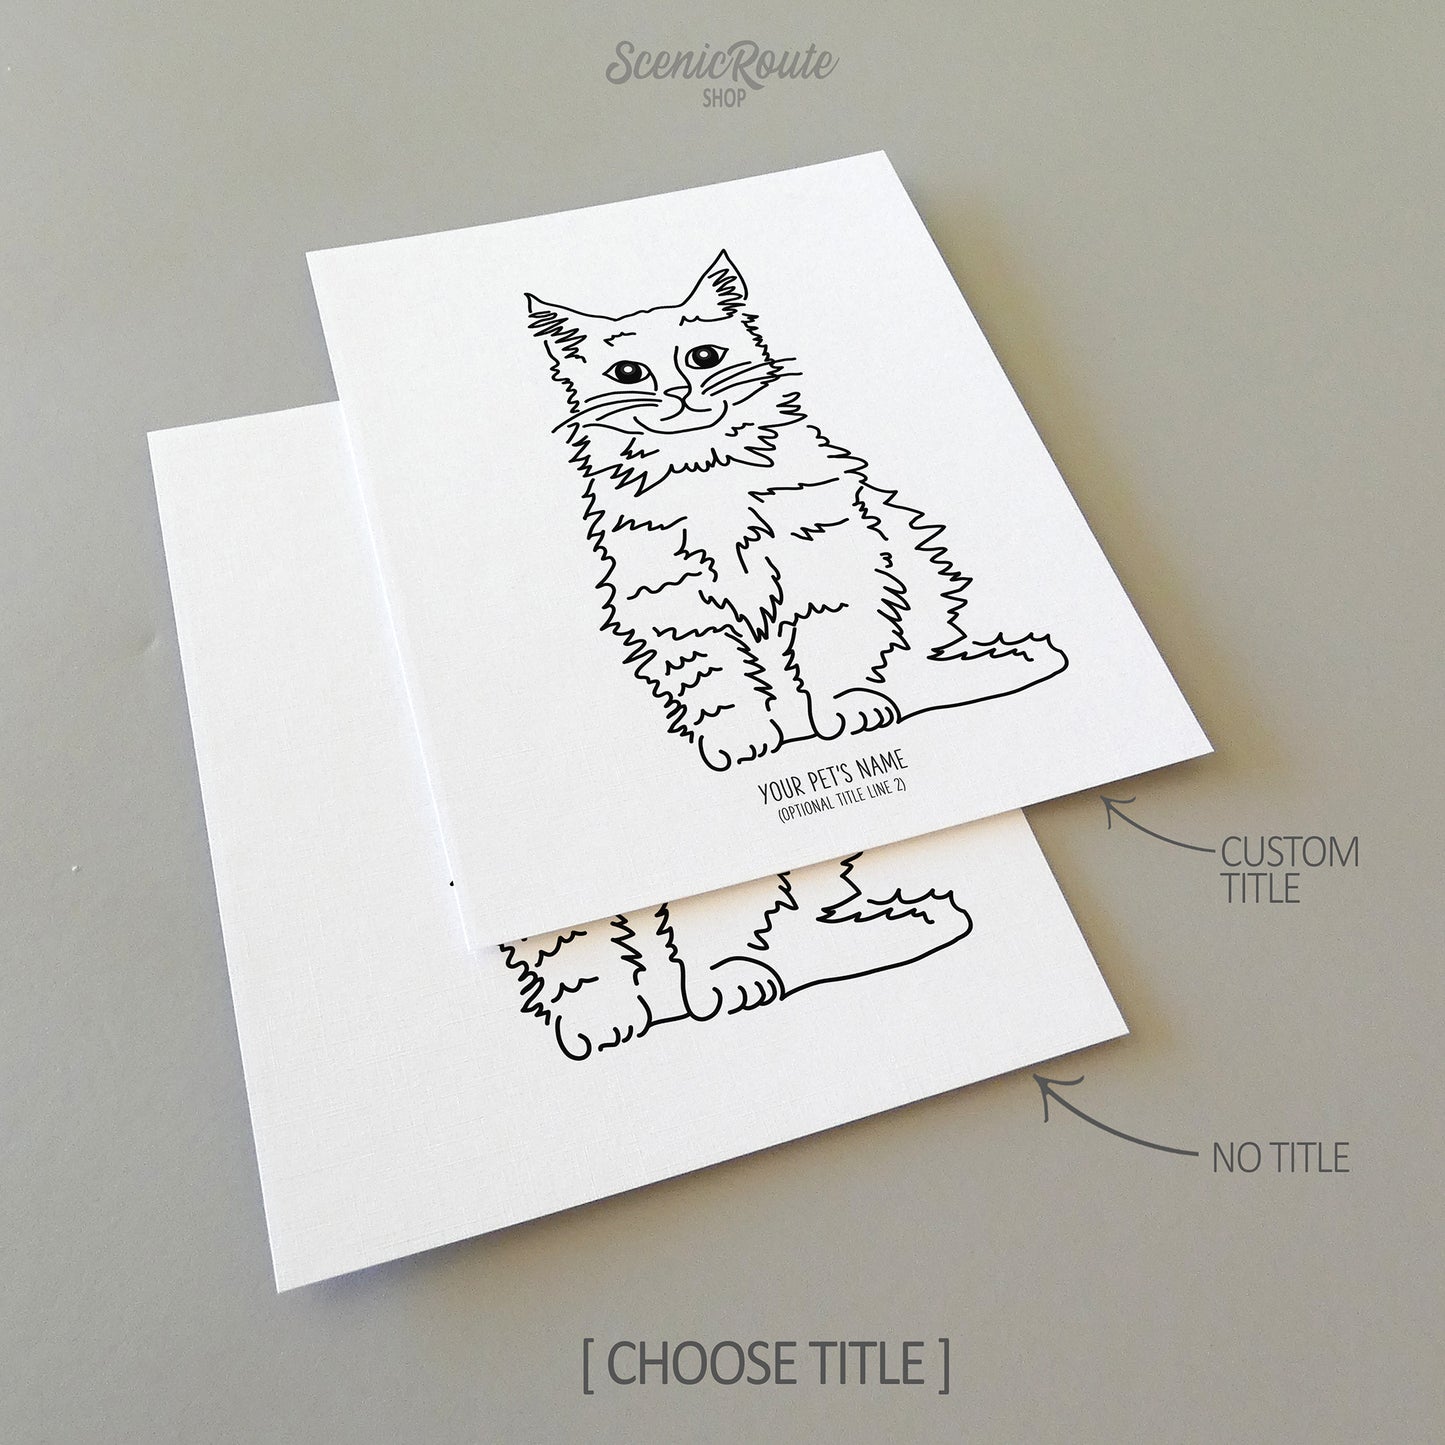 Two line art drawings of a Maine Coon Cat on white linen paper with a gray background.  The pieces are shown with “No Title” and “Custom Title” options for the available art print options.